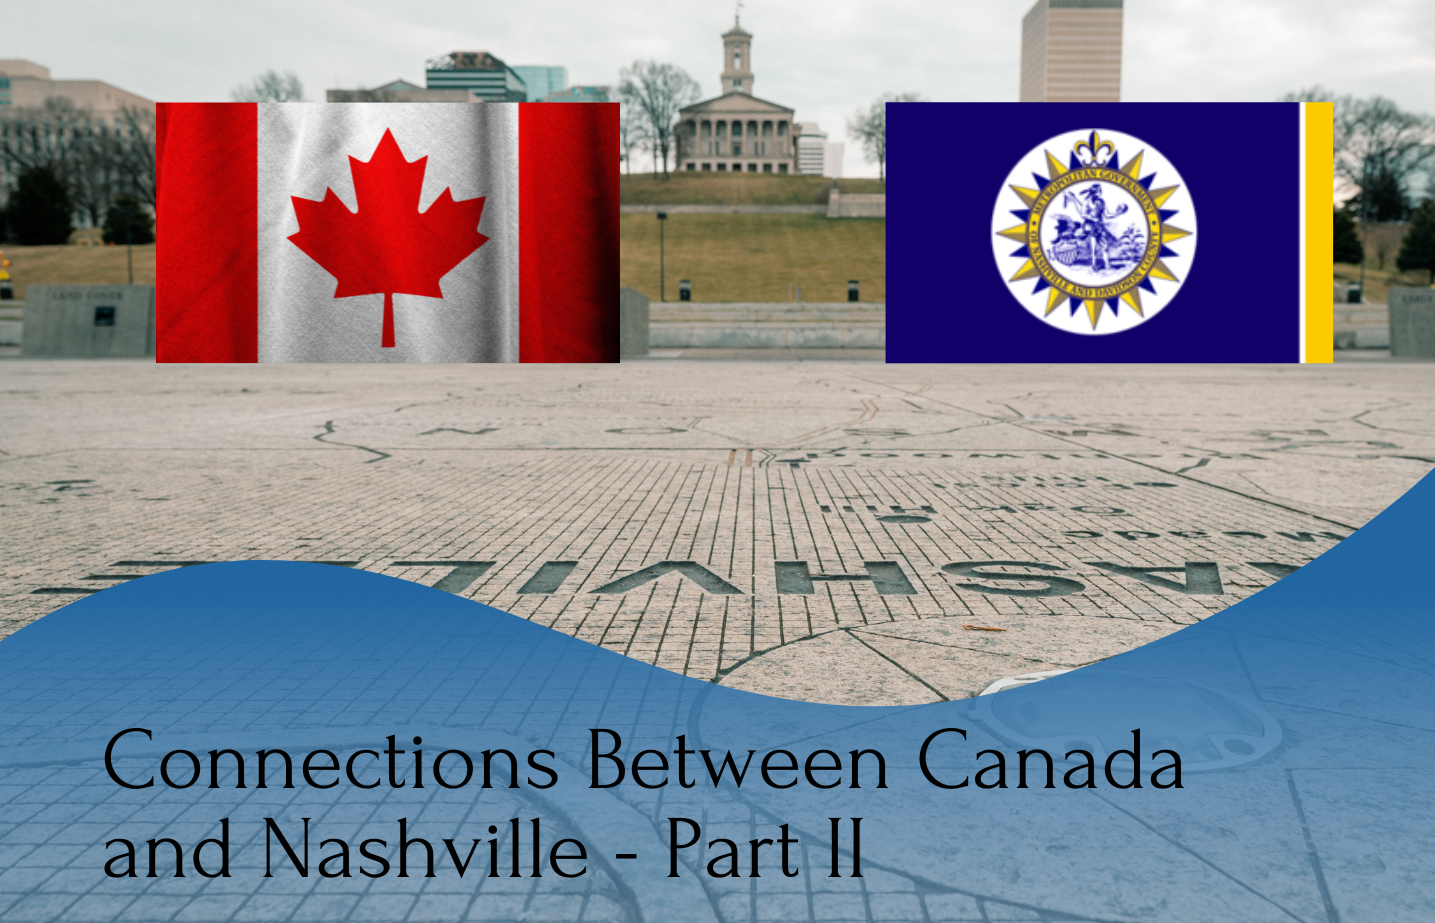 A photo of Canada and Nashville's flag and a written text "Connections Between Canada and Nashville - Part II"